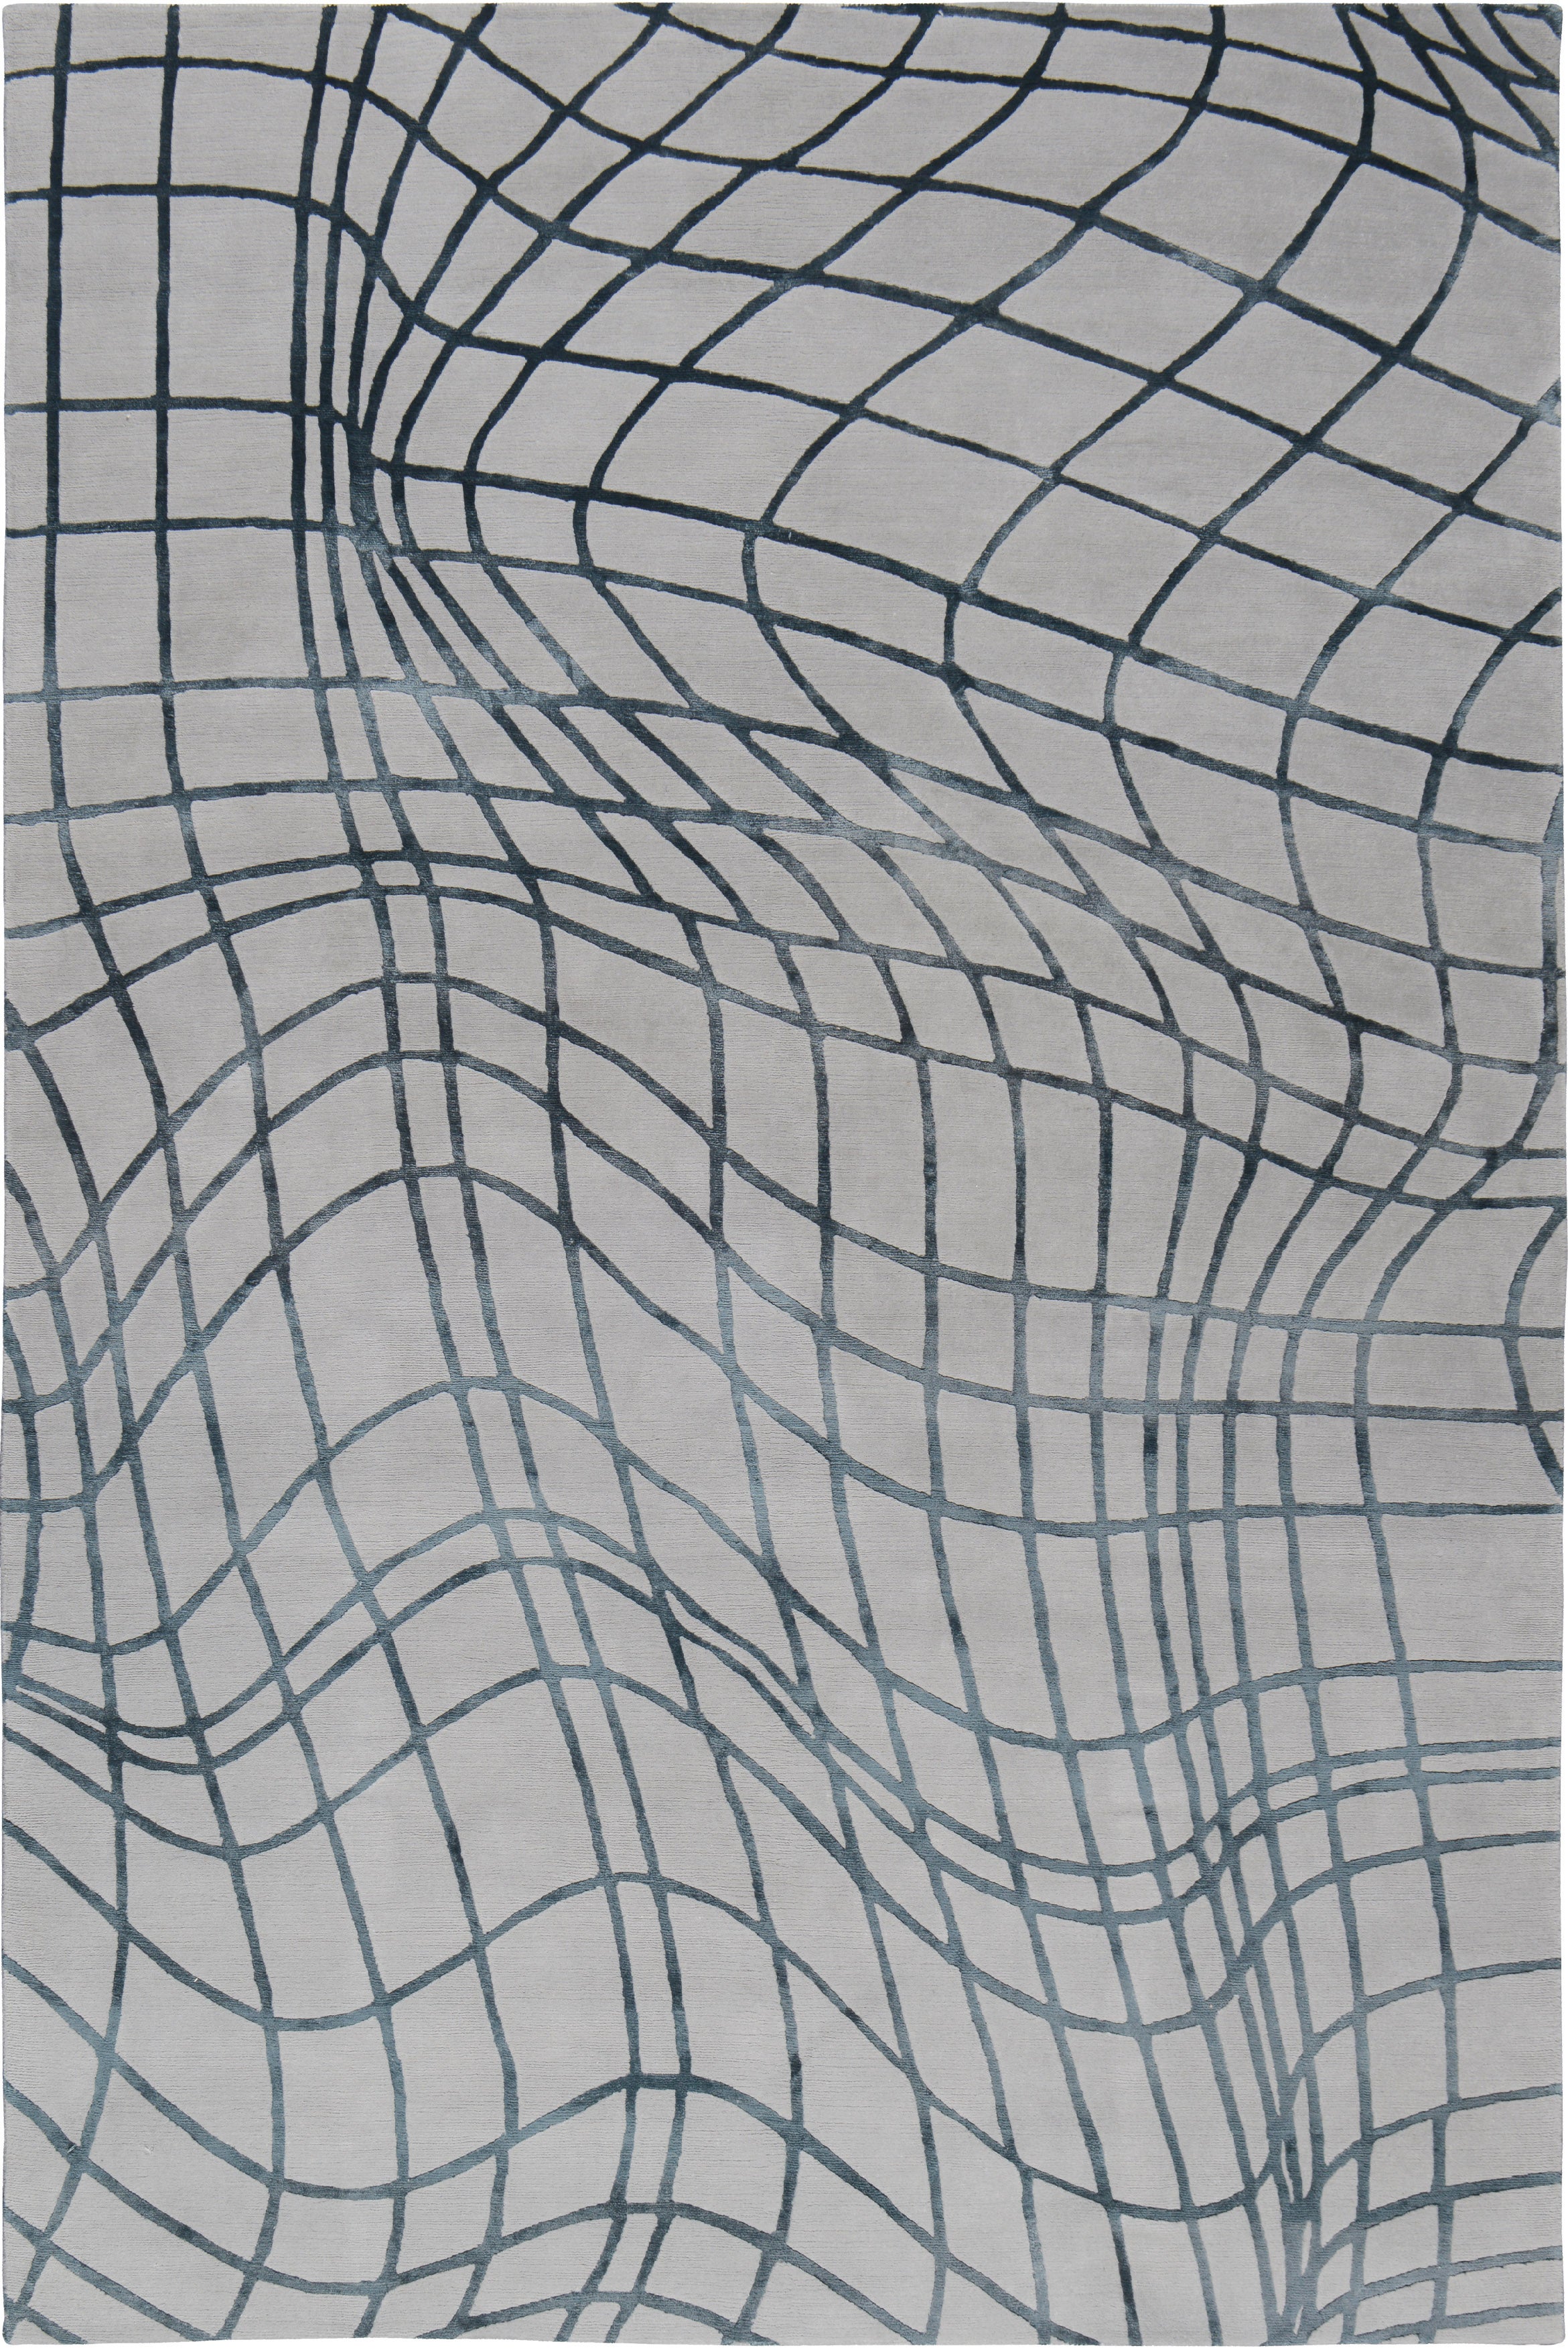 Wavelength features a distorted grid motif inspired by a 3D graph. The rug transforms the abstract lines into a bold motif, perfect for adding intrigue to a space. Woven by our expert craftspeople in Nepal using the finest wool and silk.